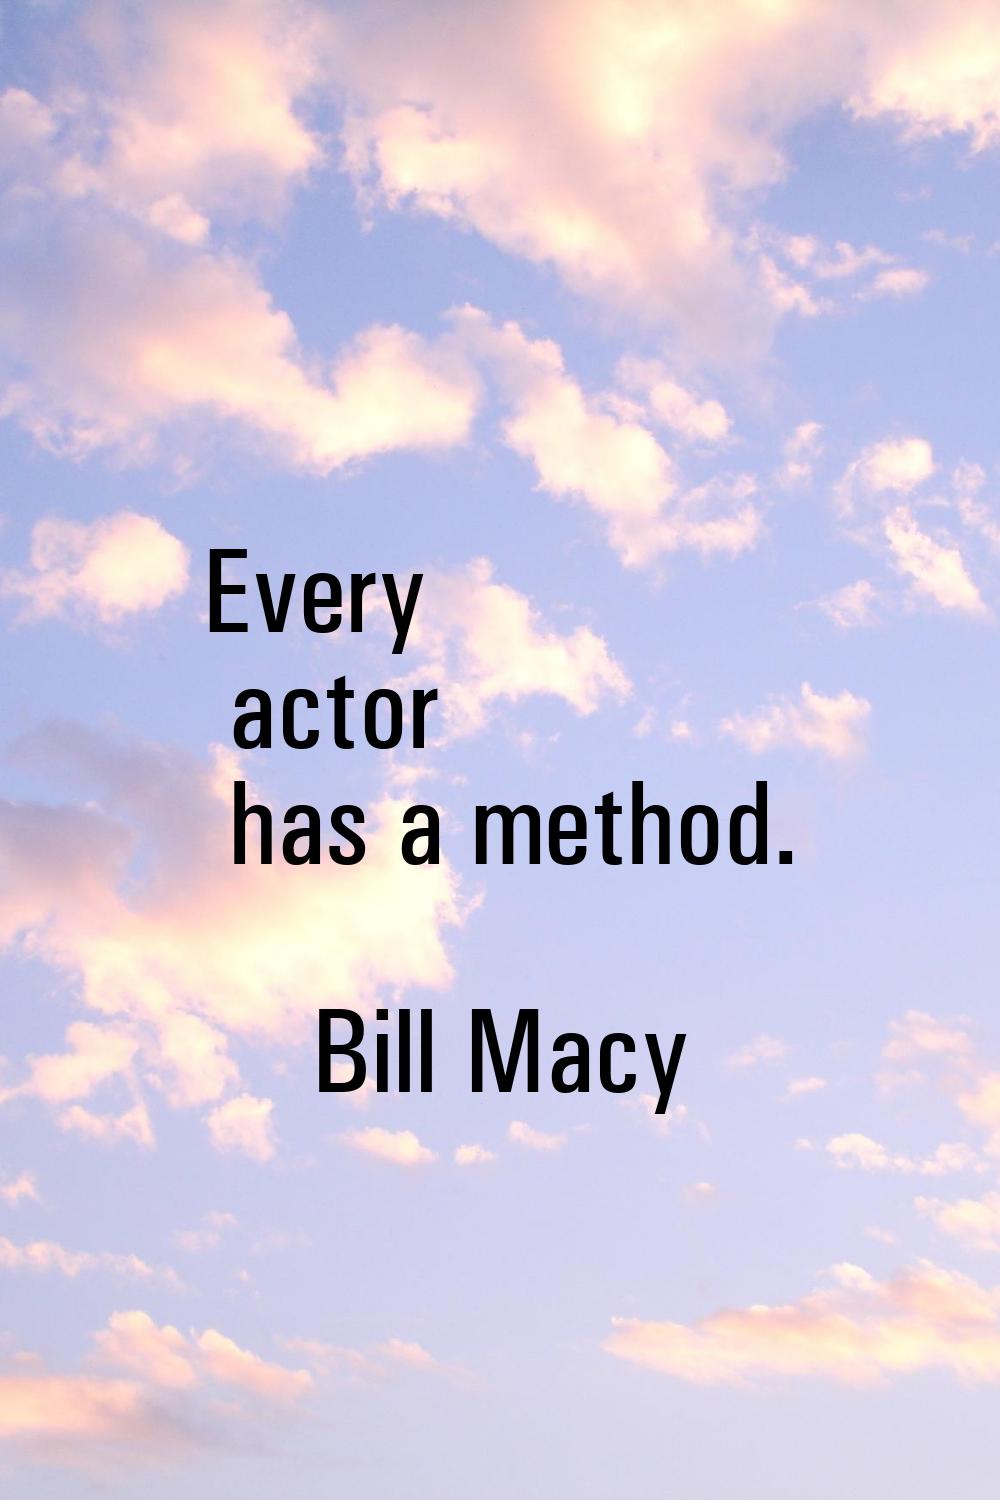 Every actor has a method.